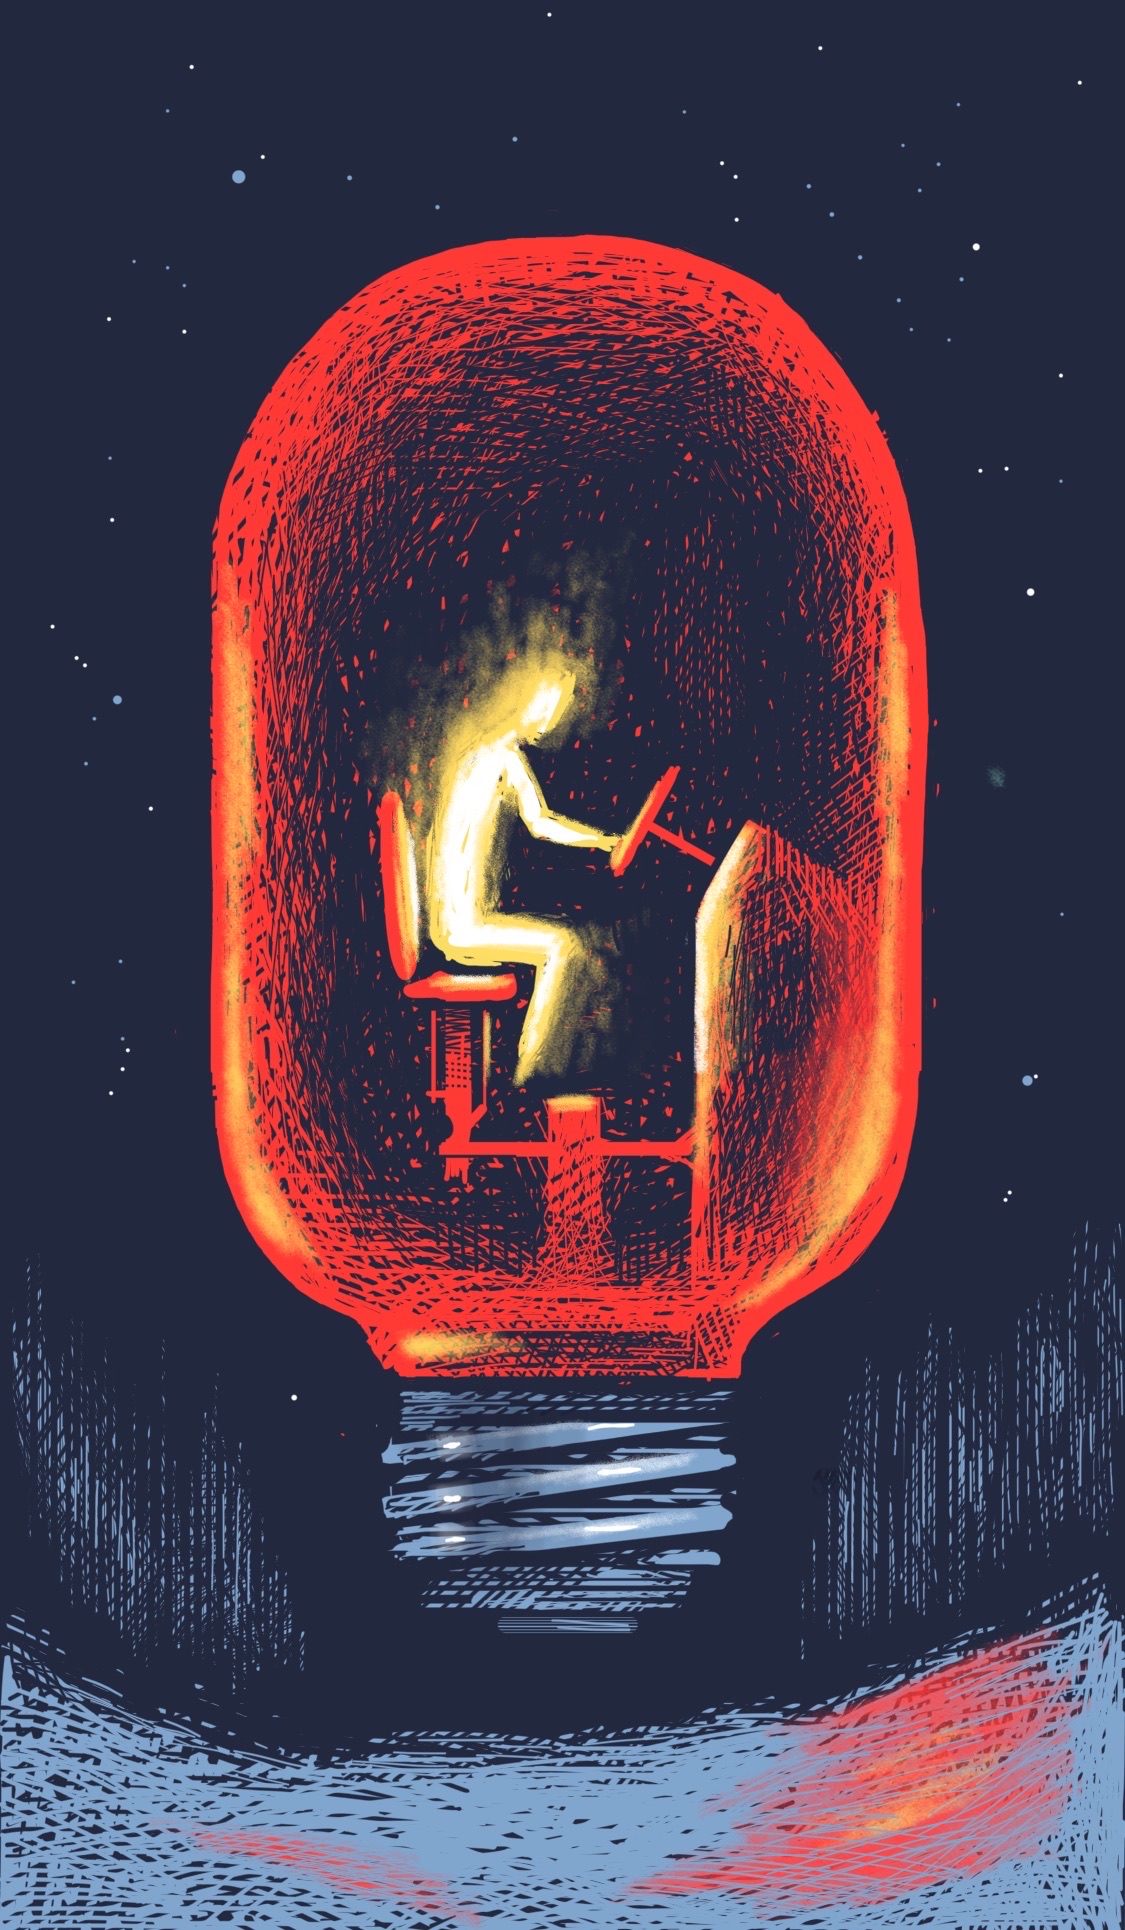 A flaming person pilots a glowing red lightbulb across a snowscape at night